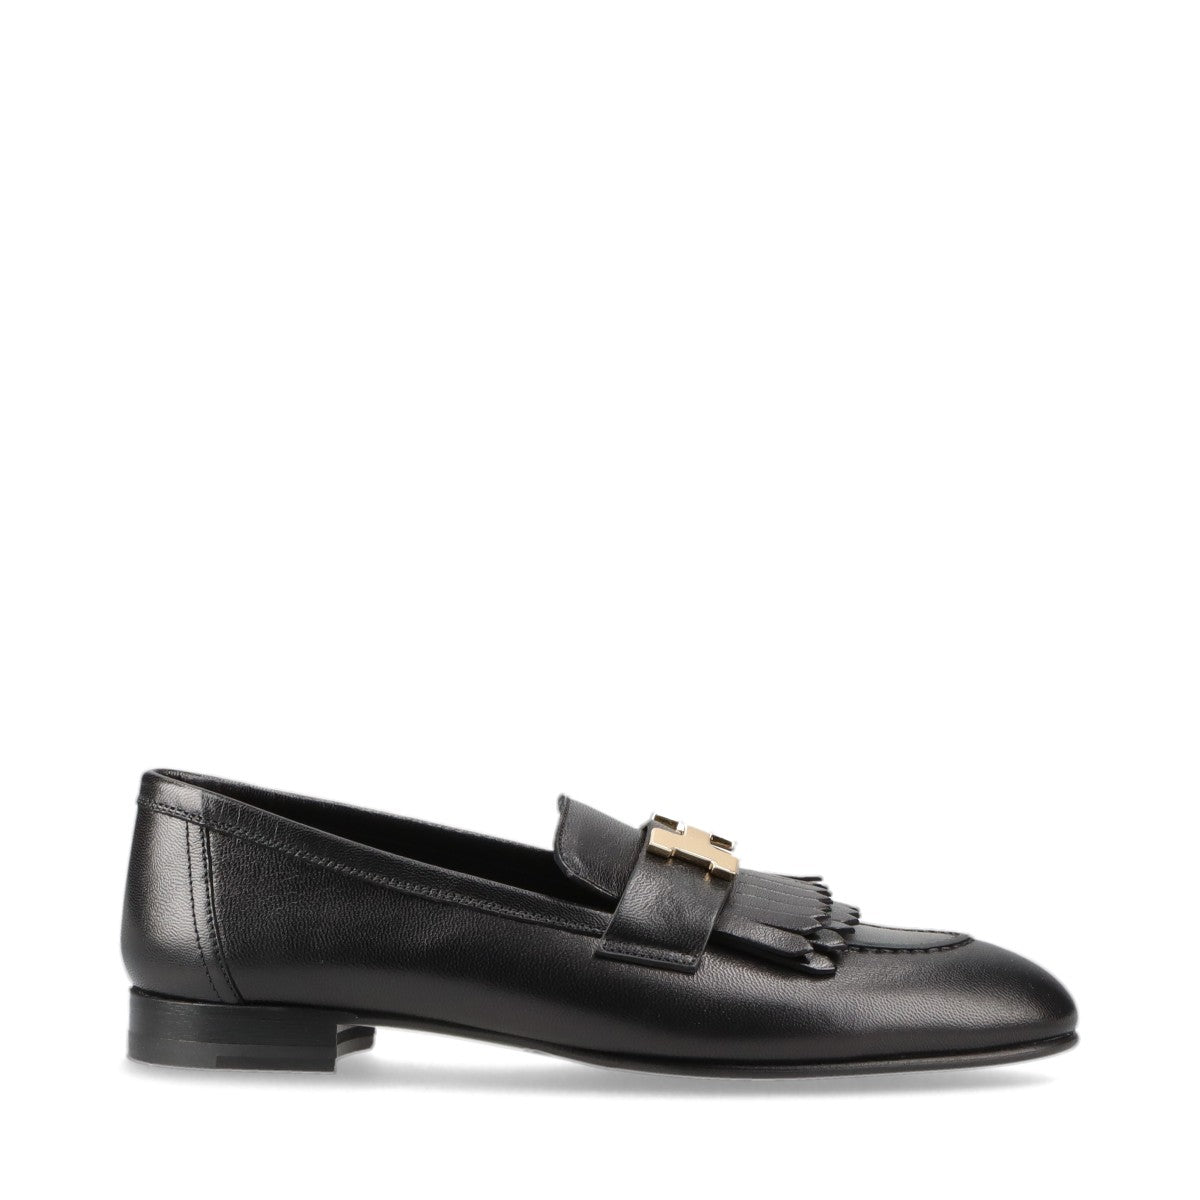 Hermès Royal Leather Loafer EU36 1/2 Ladies' Black Constance Fringe Box There is a bag